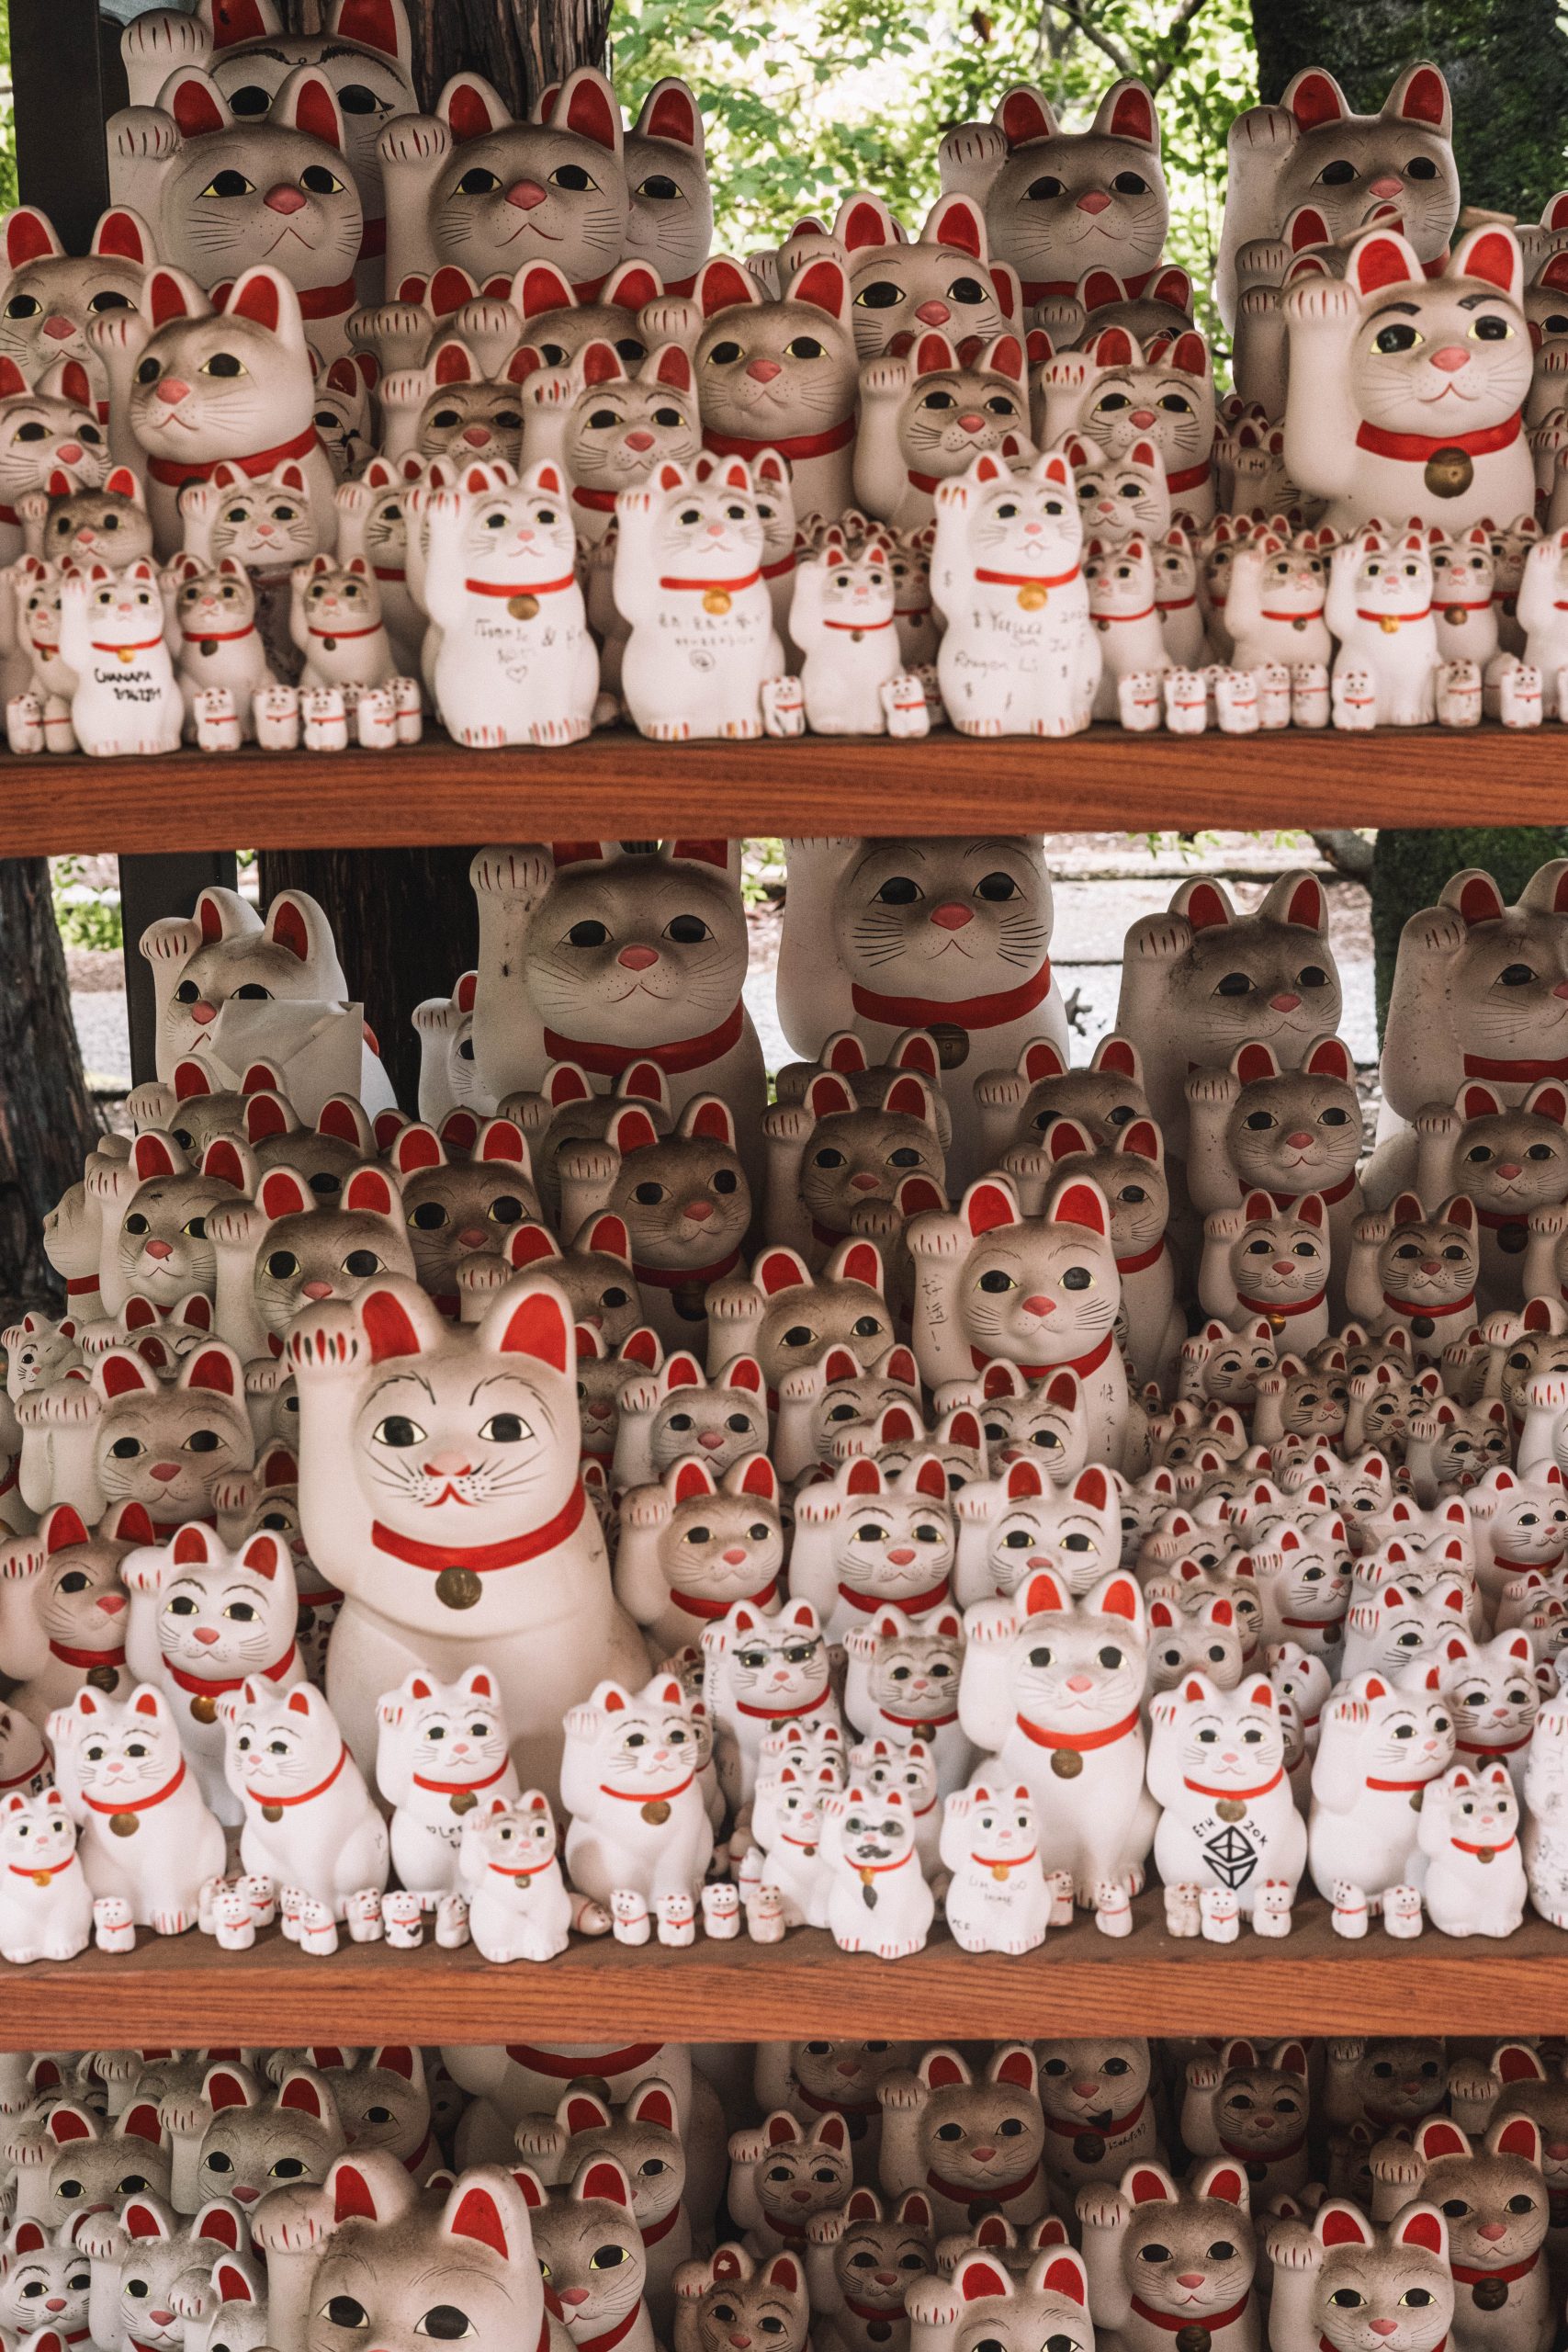 Lots of cat figurines at gotokuji temple